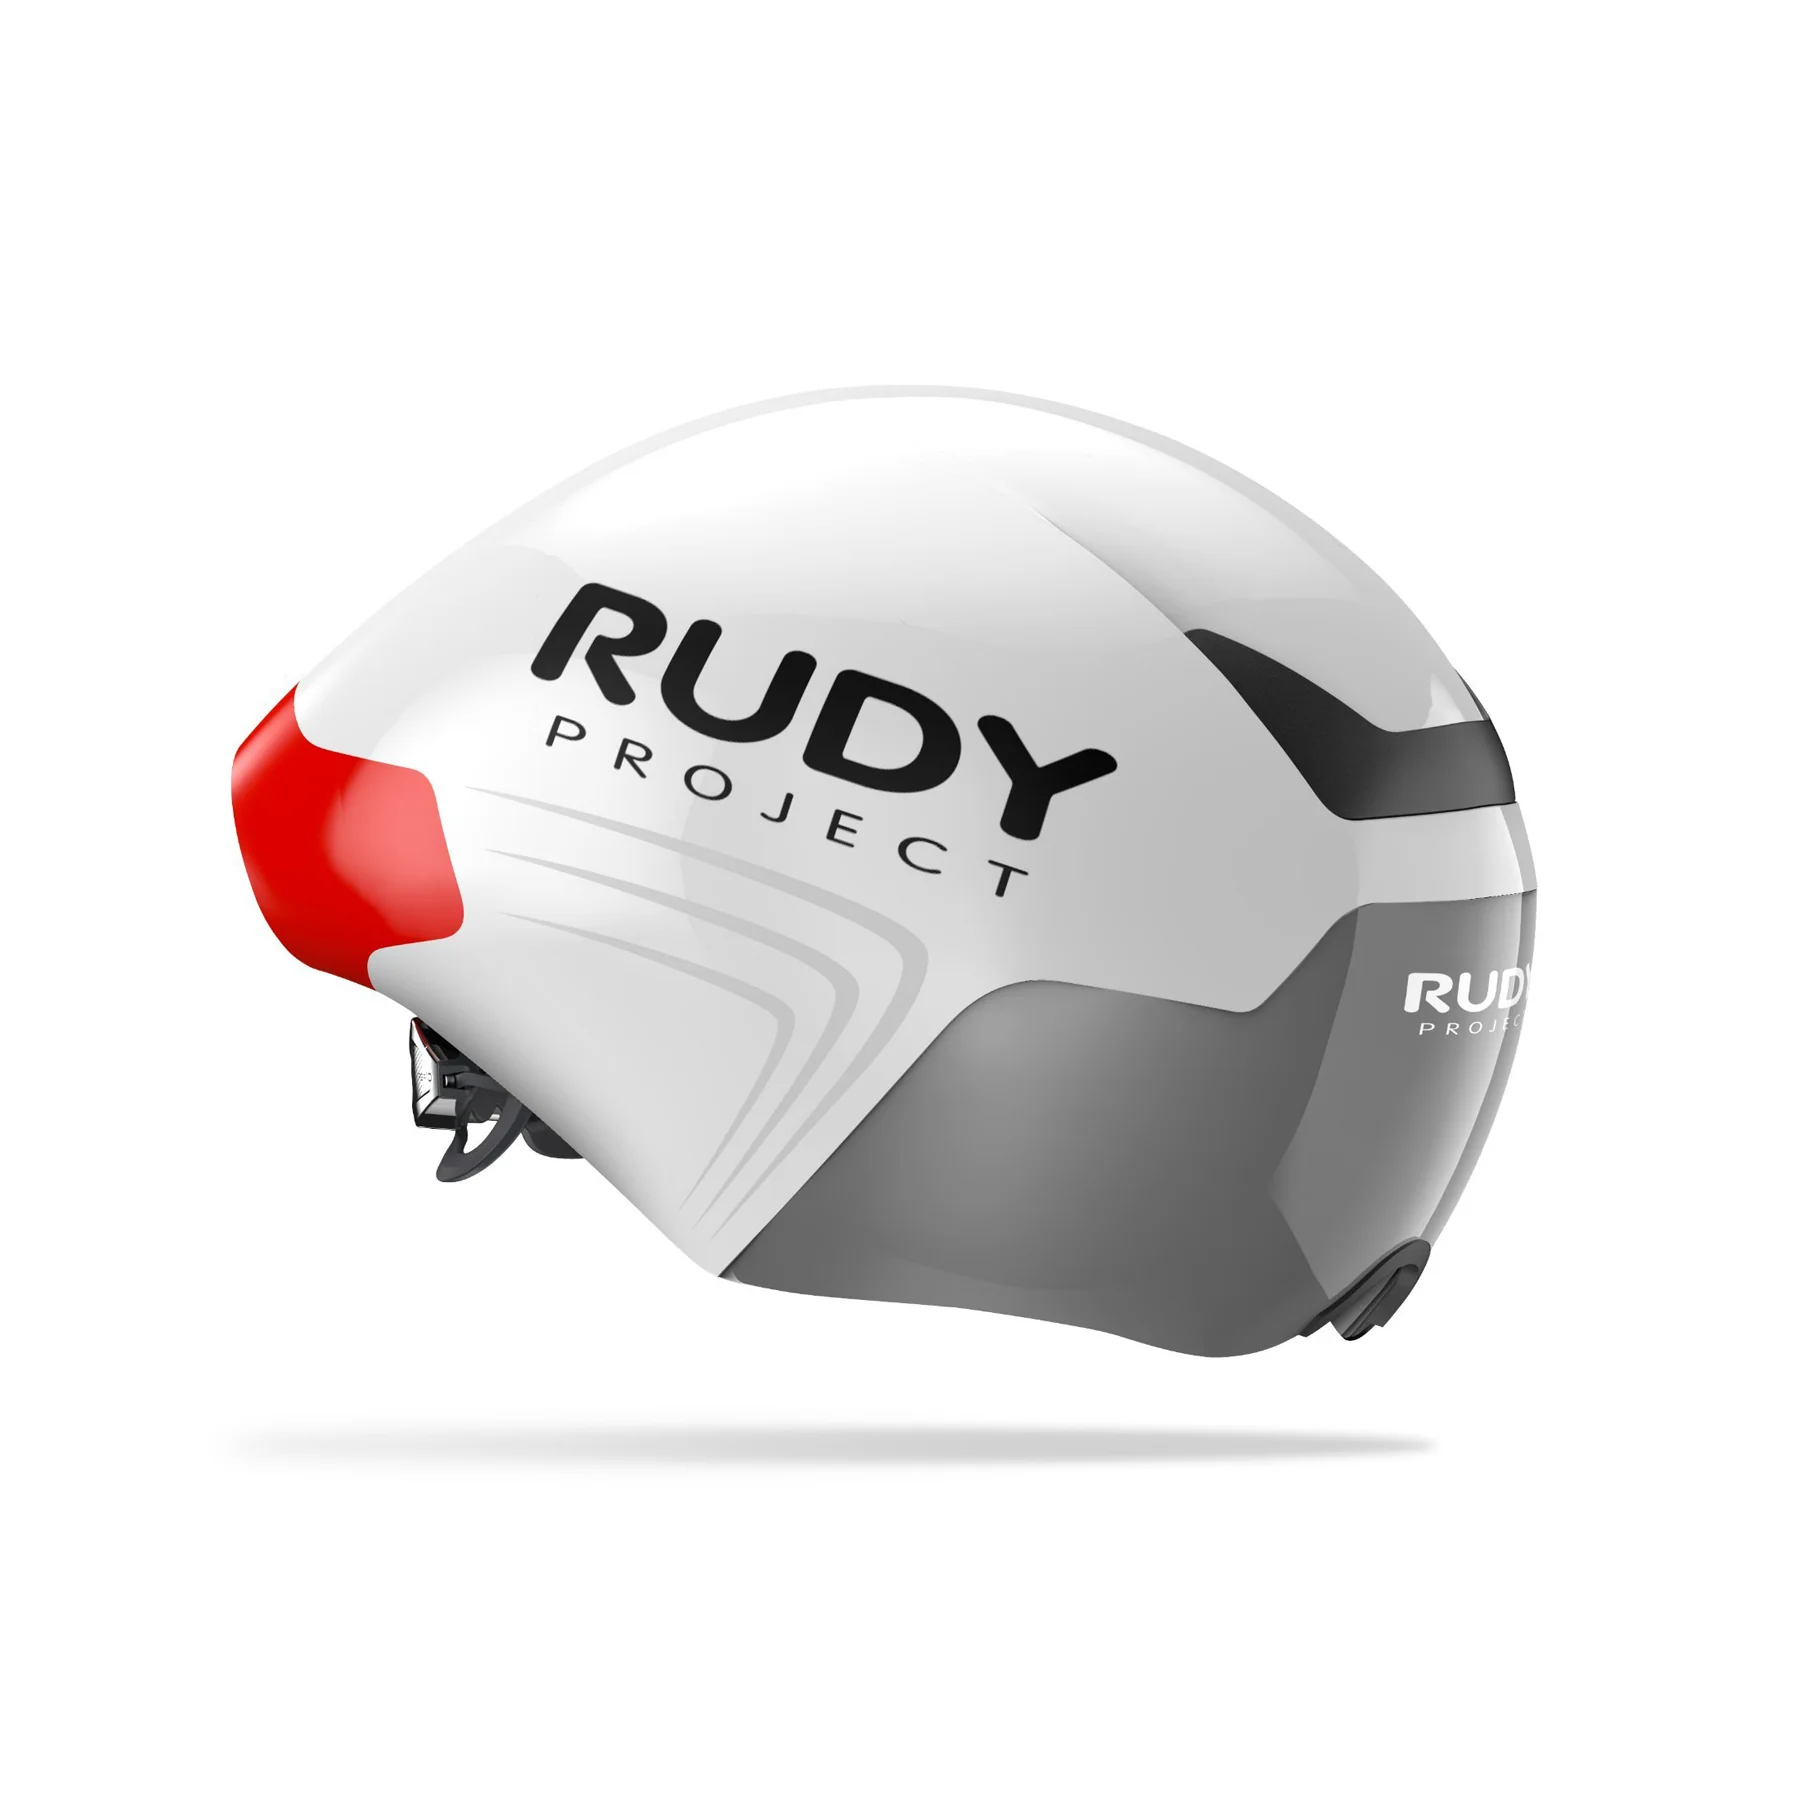 Rudy_Project_The_Wing_HL73000_1800x1800.jpg